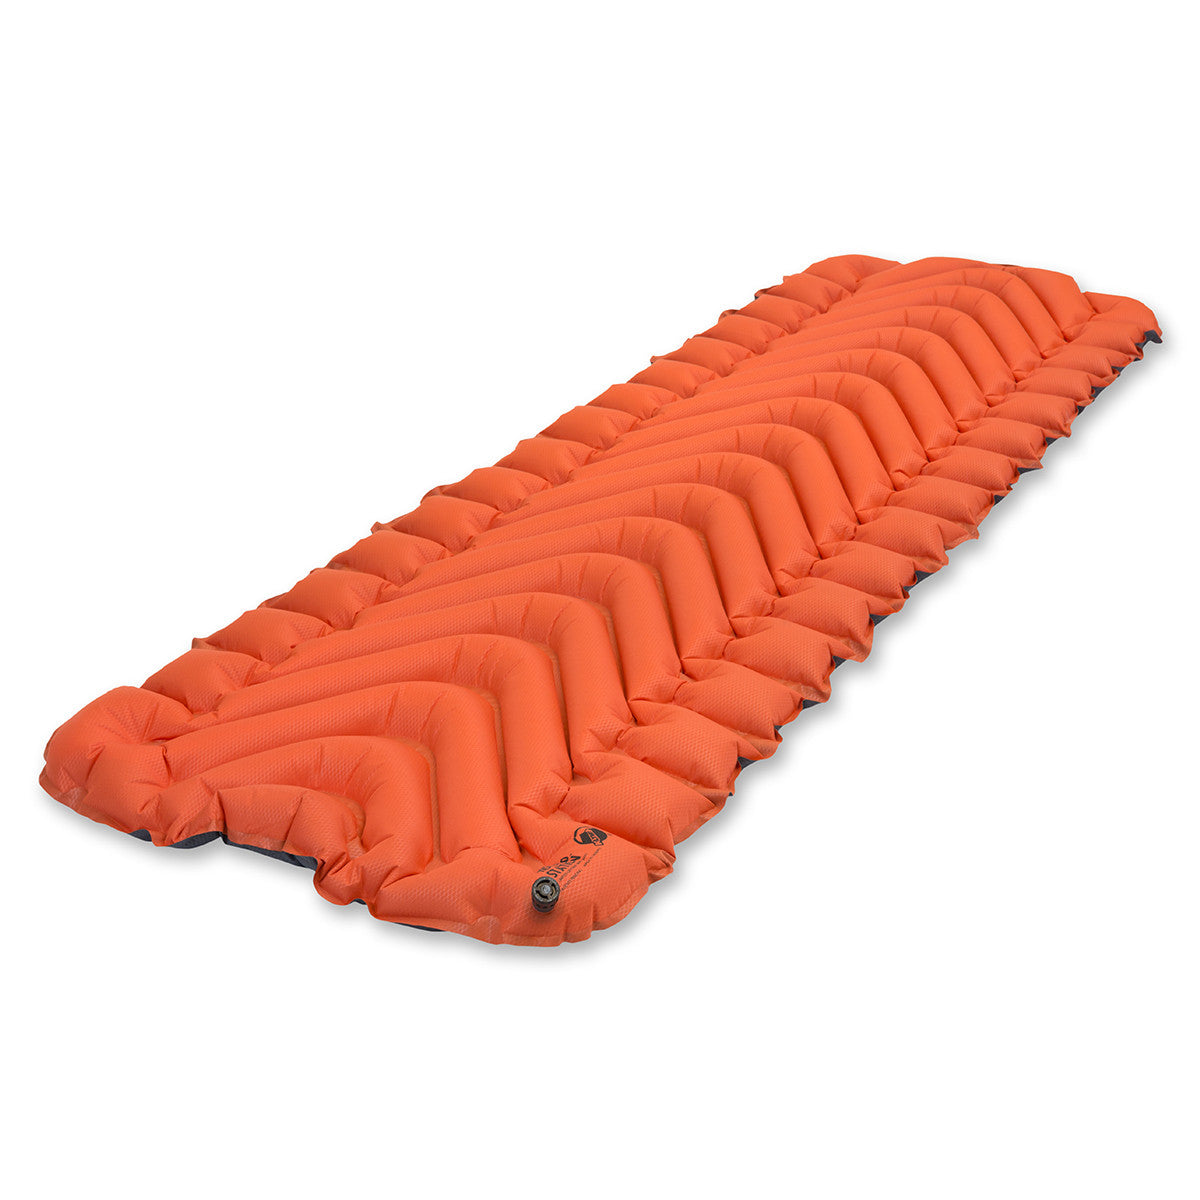 Klymit Insulated Static V Sleeping Pad in Klymit Insulated Static V Sleeping Pad - goHUNT Shop by GOHUNT | Klymit - GOHUNT Shop